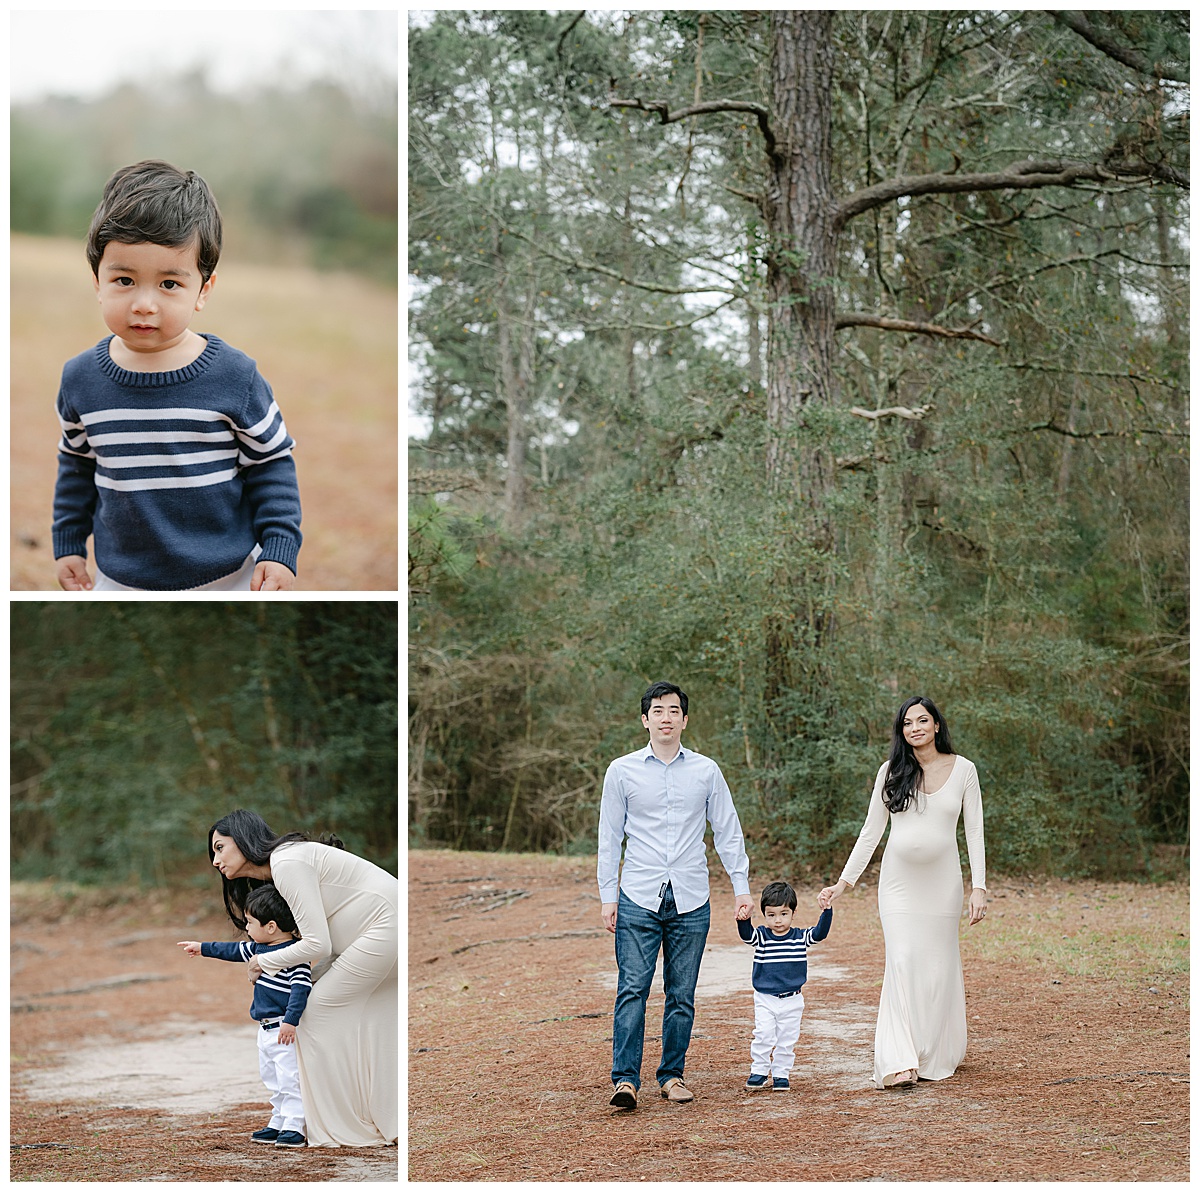 Outdoor maternity session with family